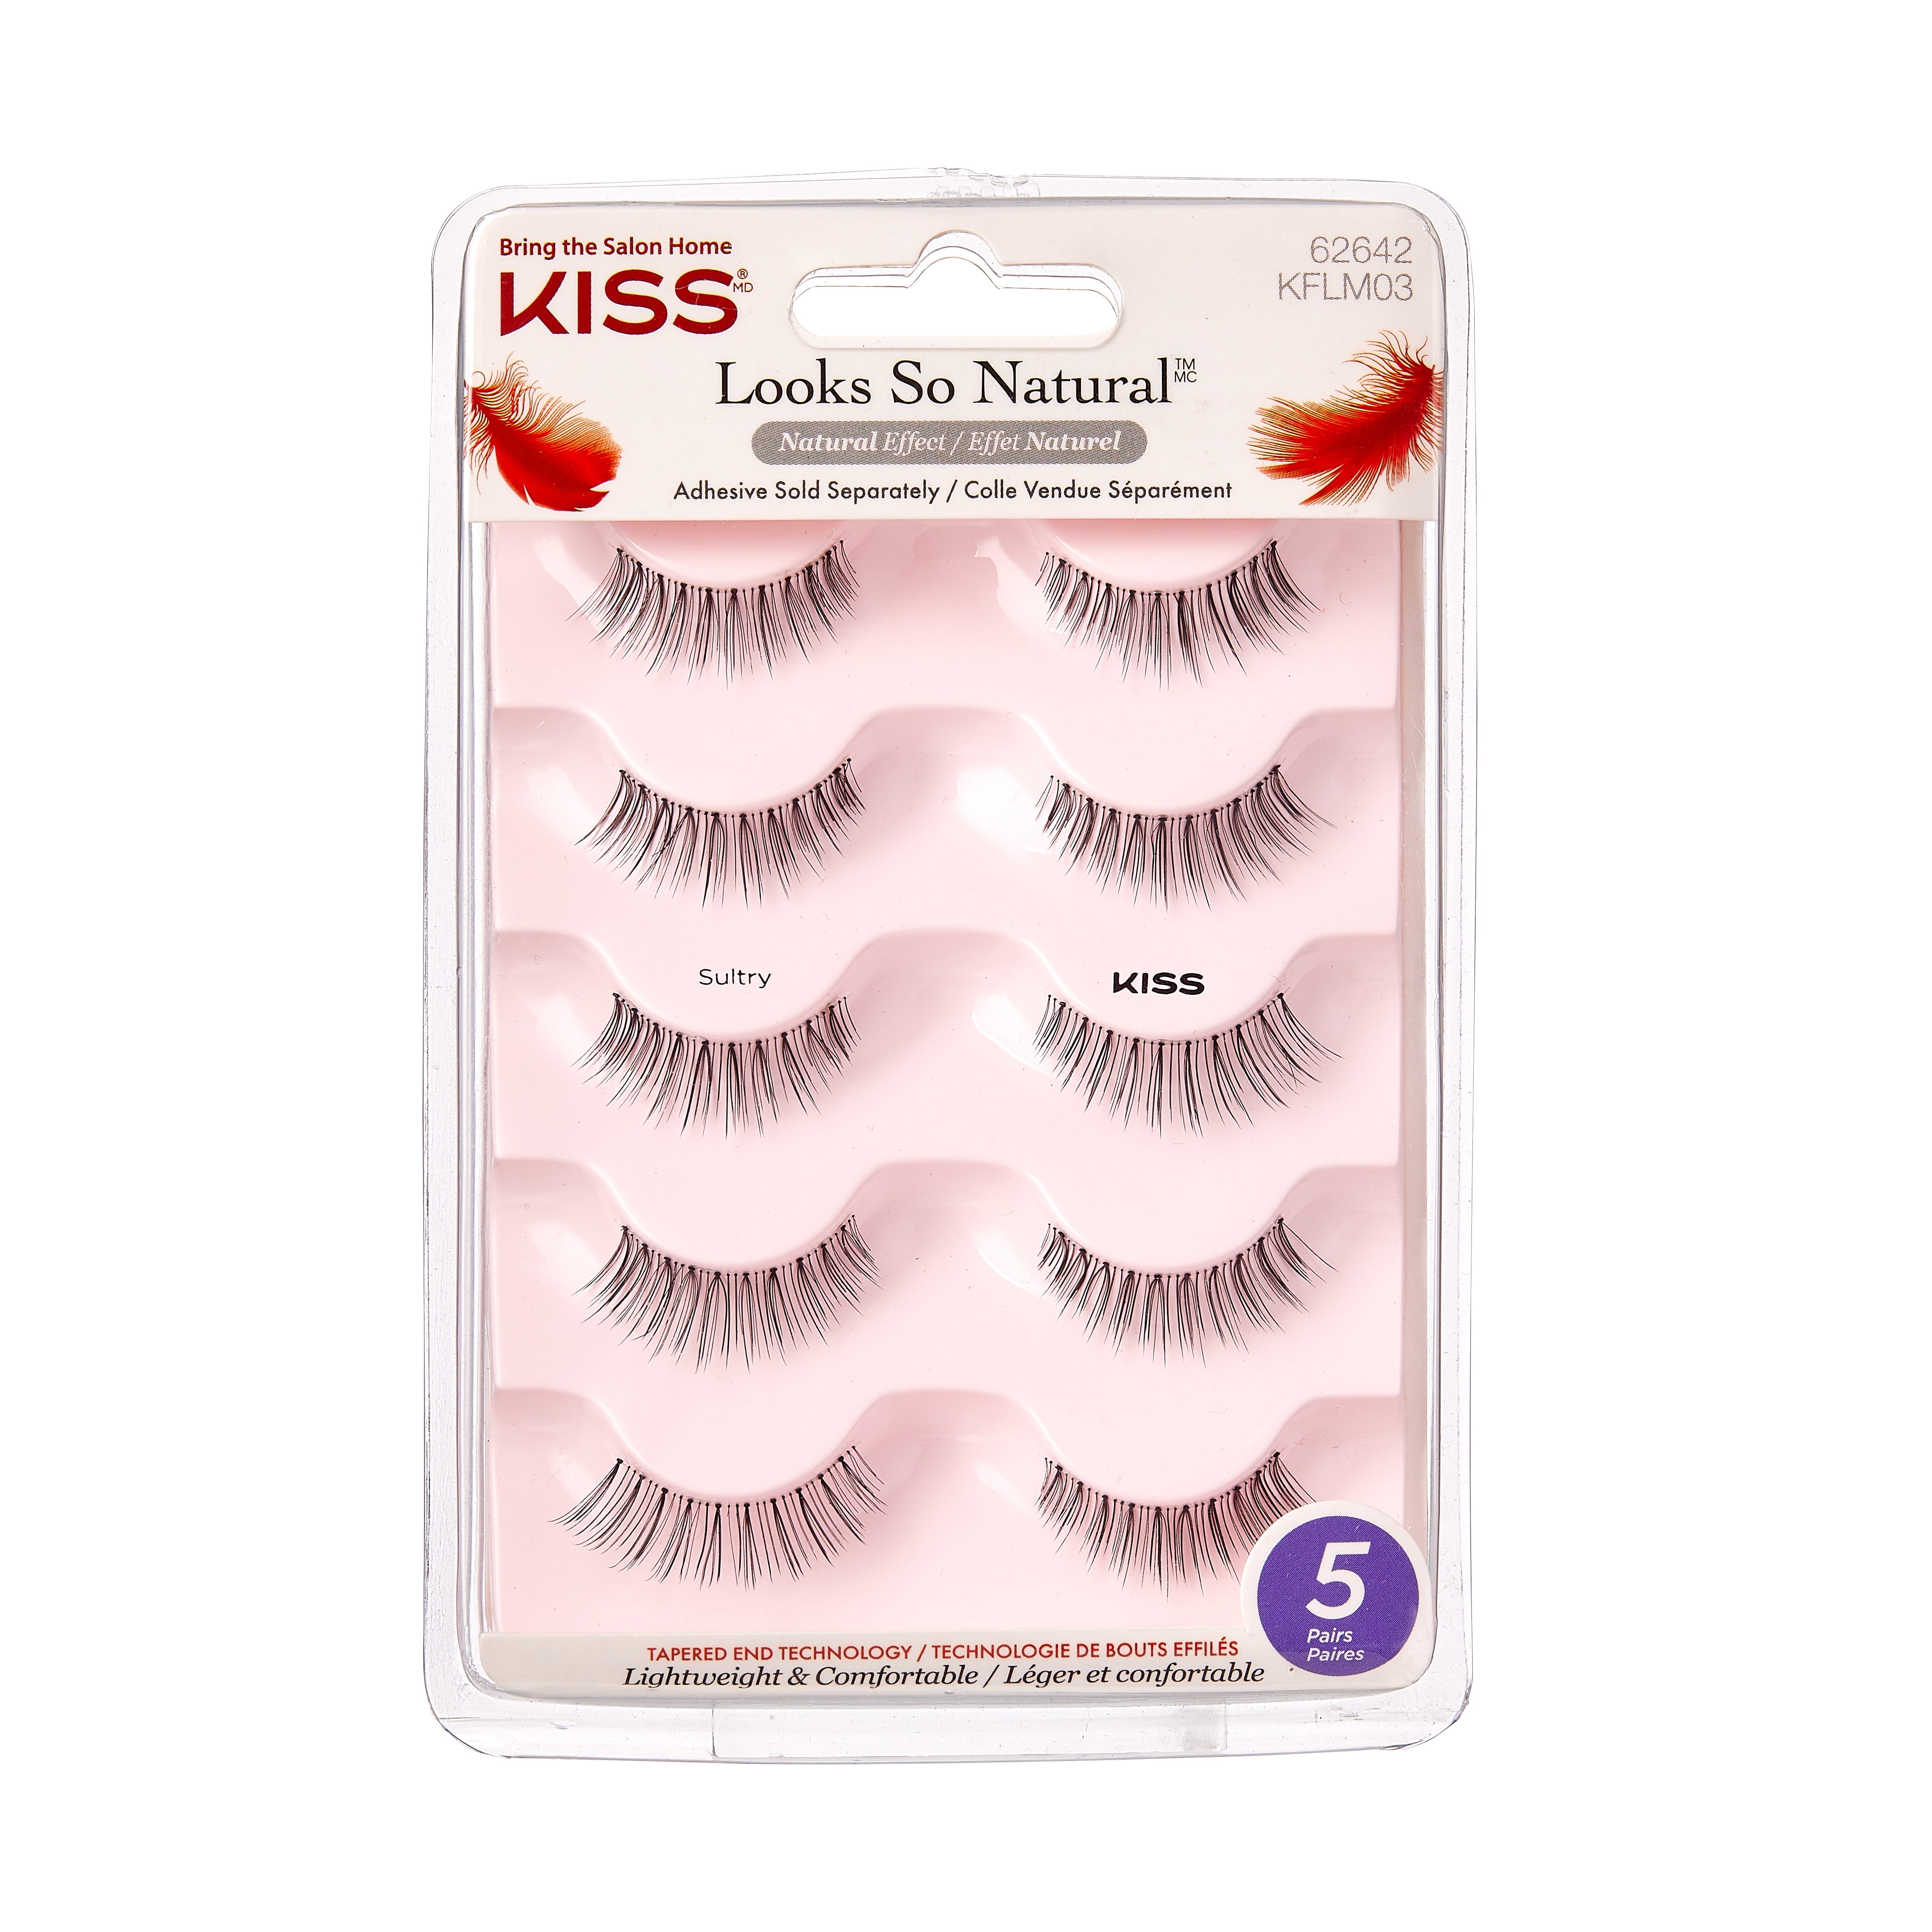 Kiss Looks so Natural Multipack Lashes - Sultry False Eyelashes, 5ct